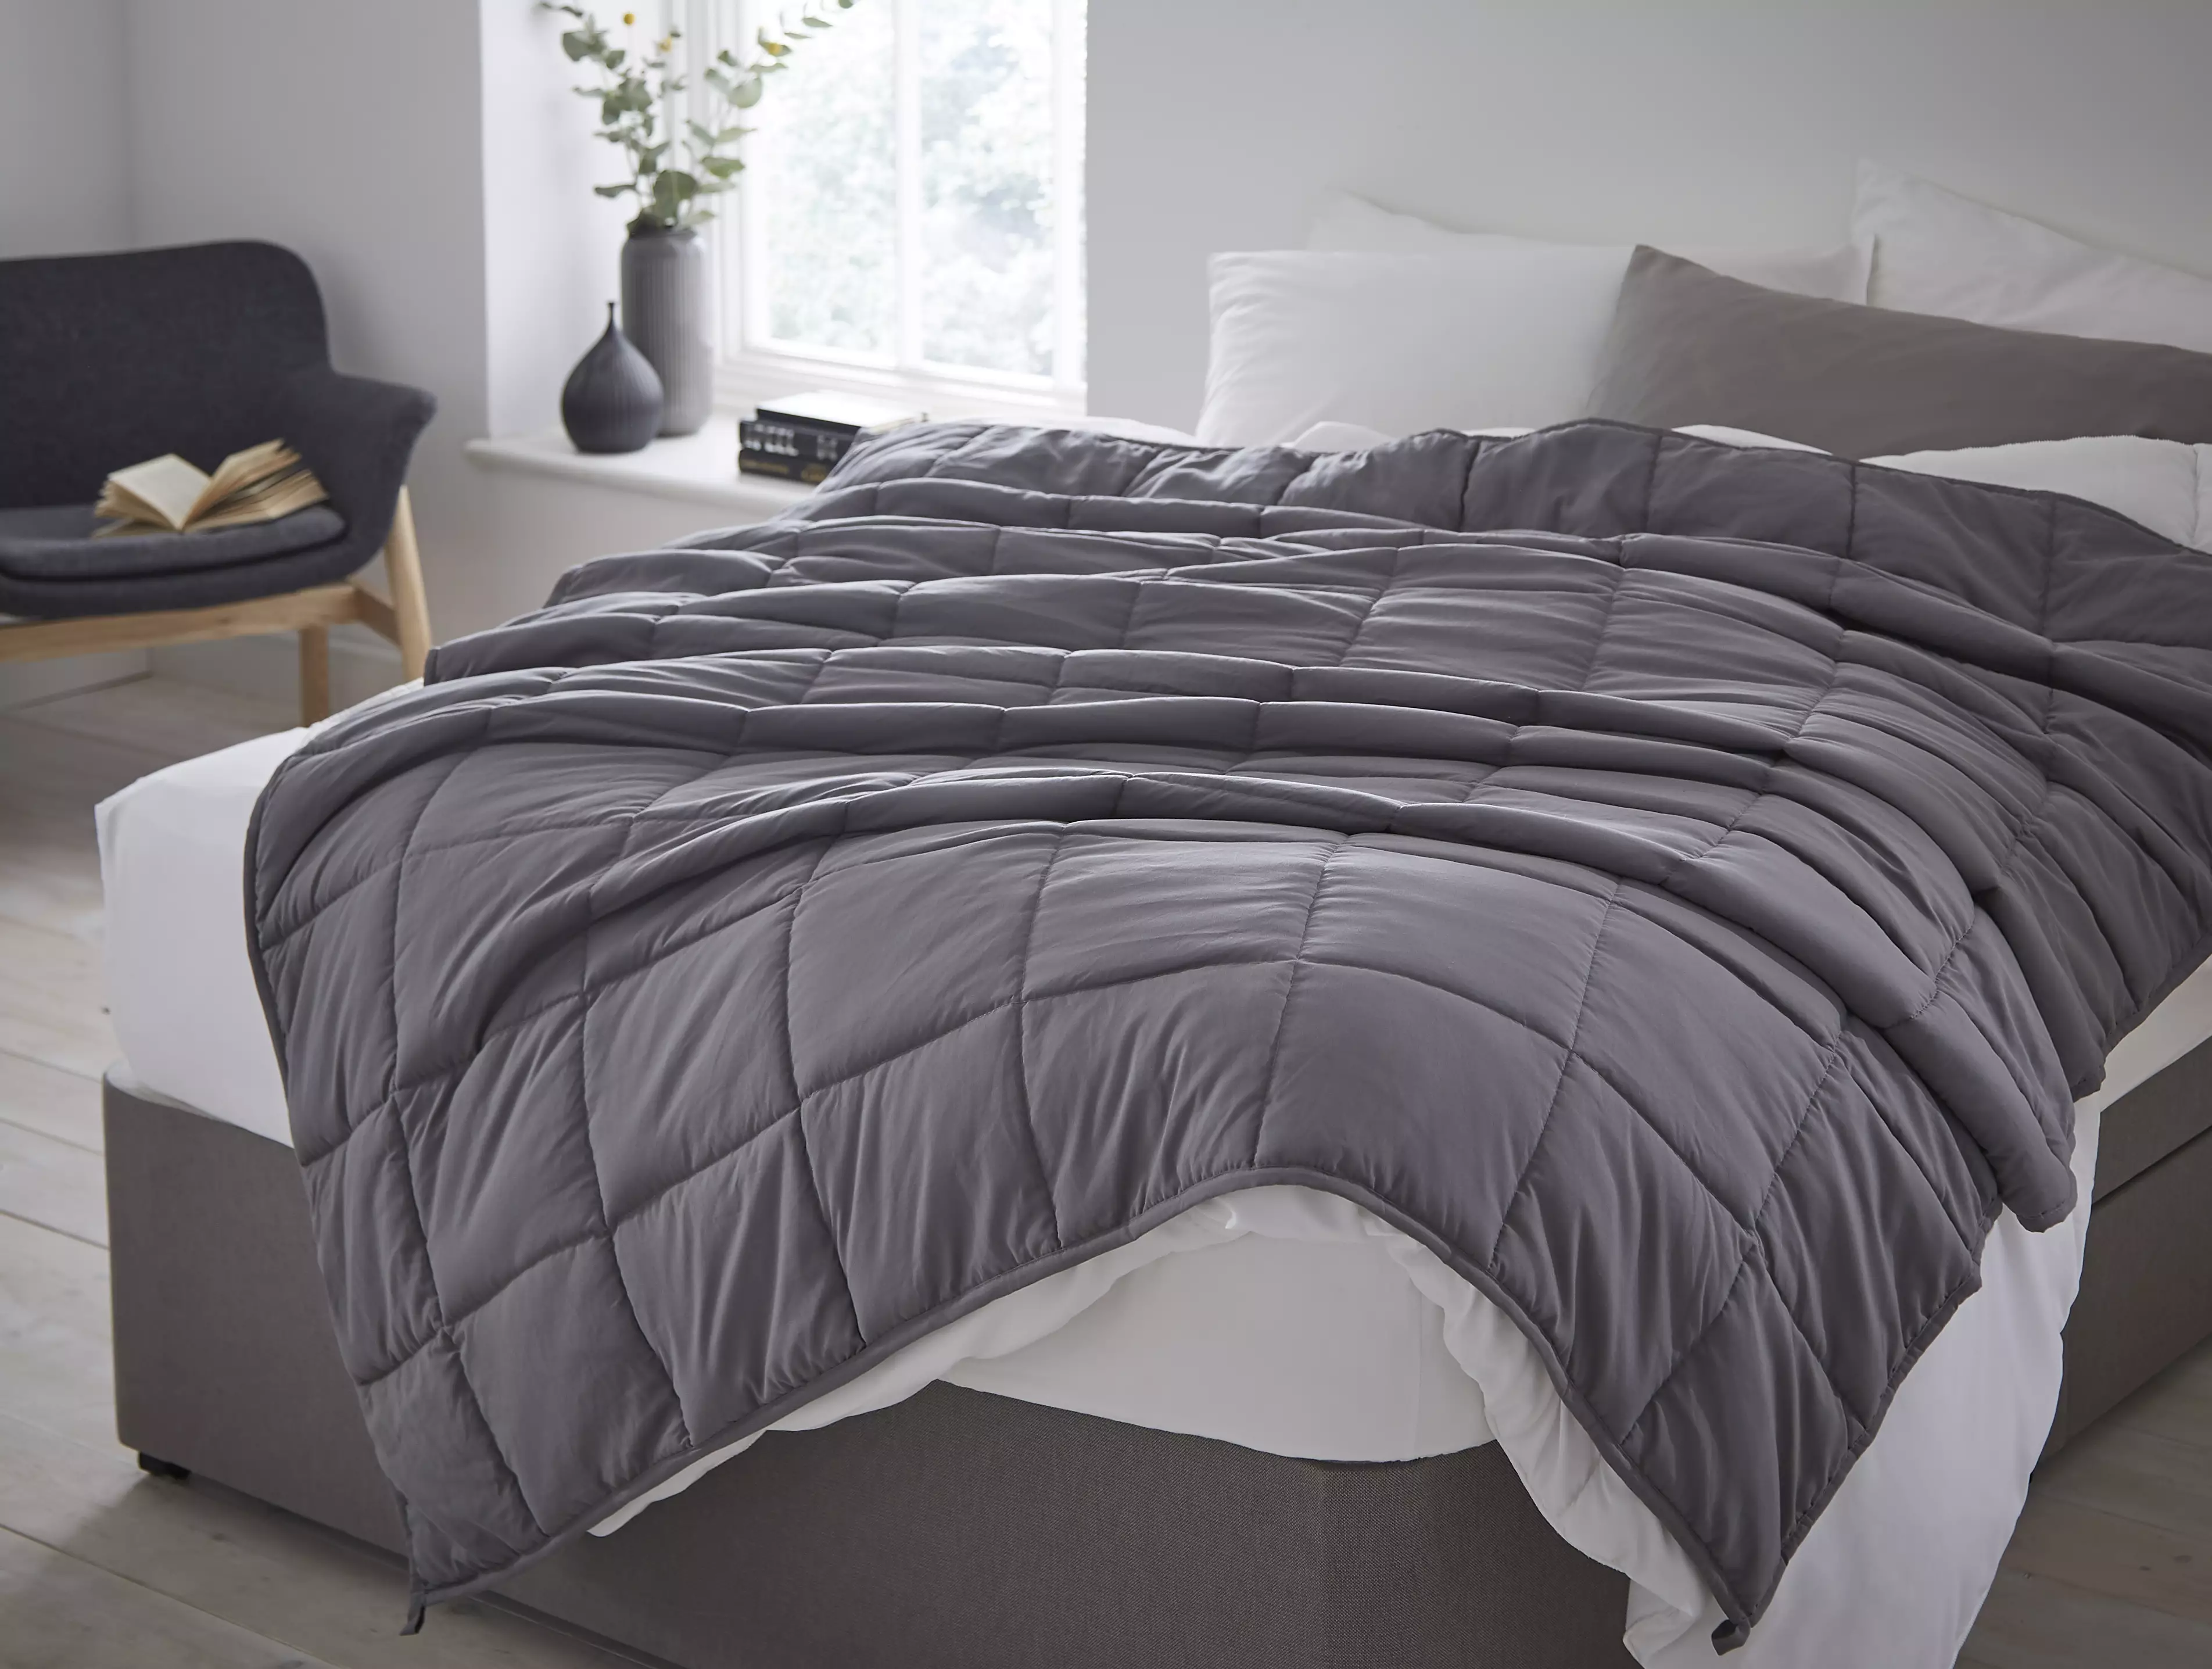 Designed by experienced sleep experts, the blanket eases stress and anxiety (